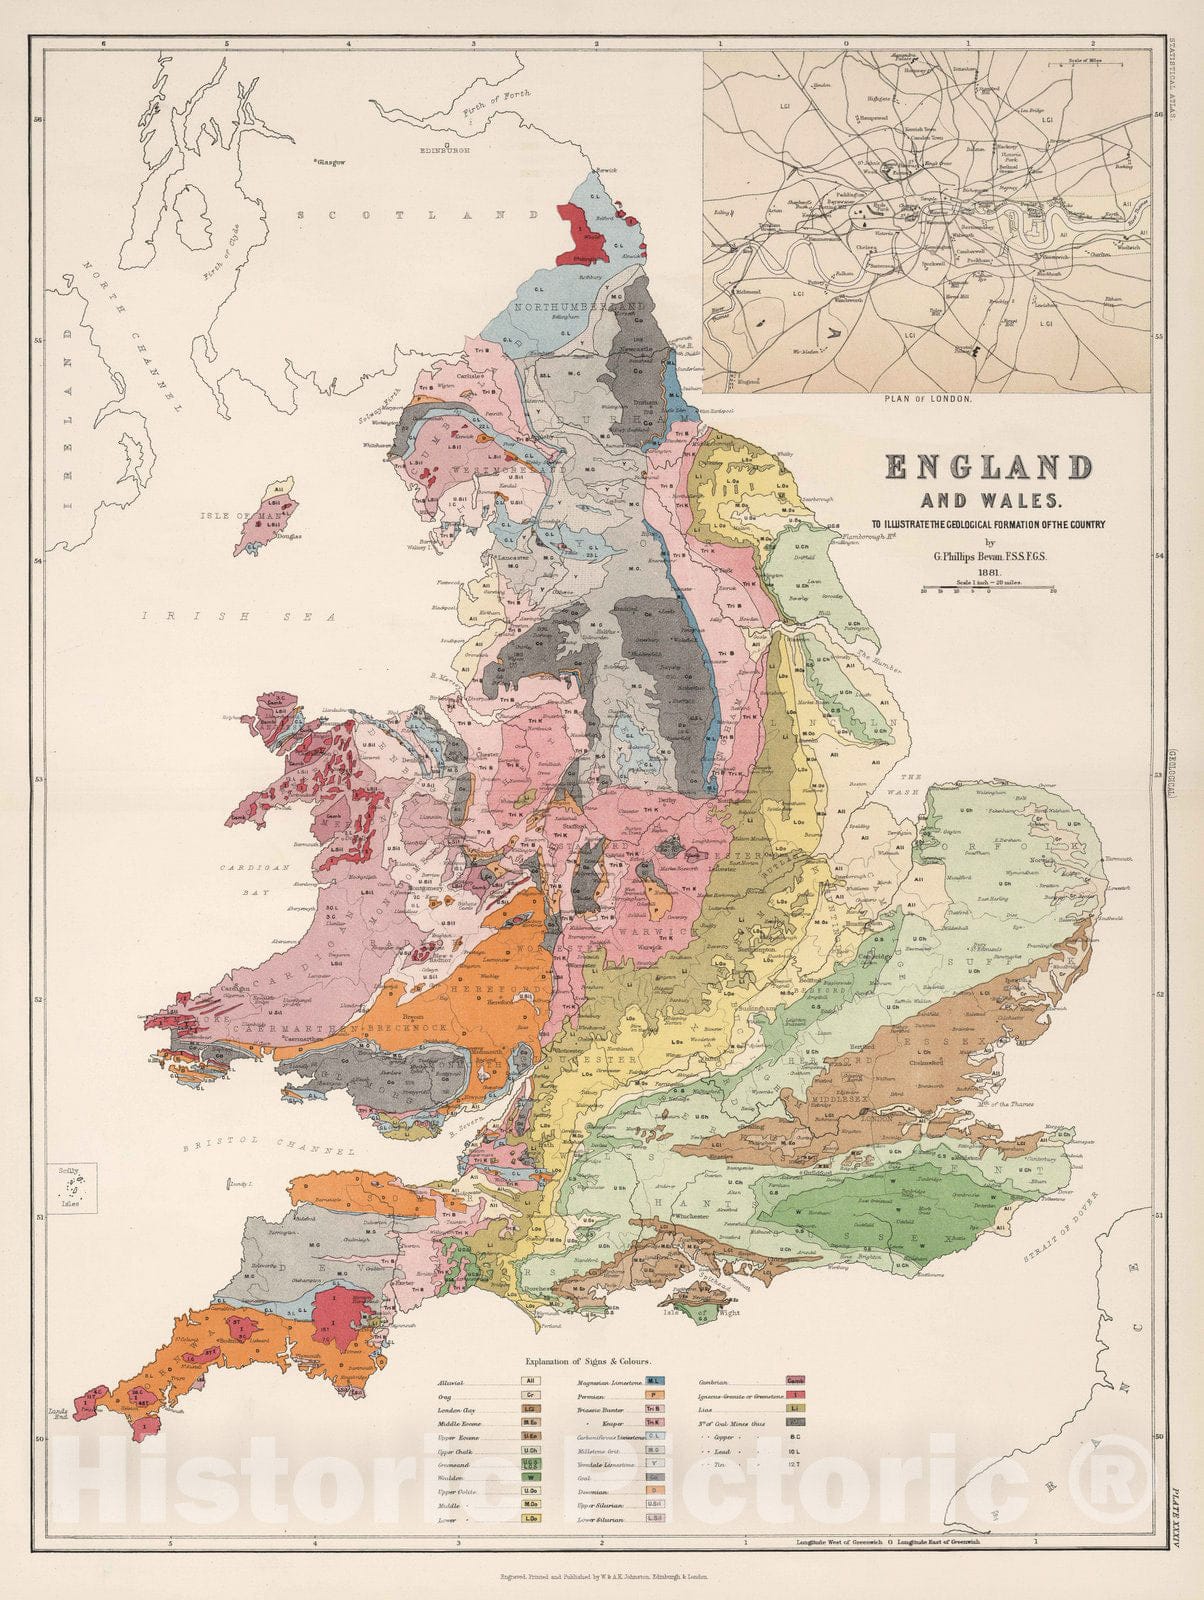 Historic Map : Statistical Atlas - 1881 England and Wales to Illustrate the Geological Formation of the Country. - Vintage Wall Art